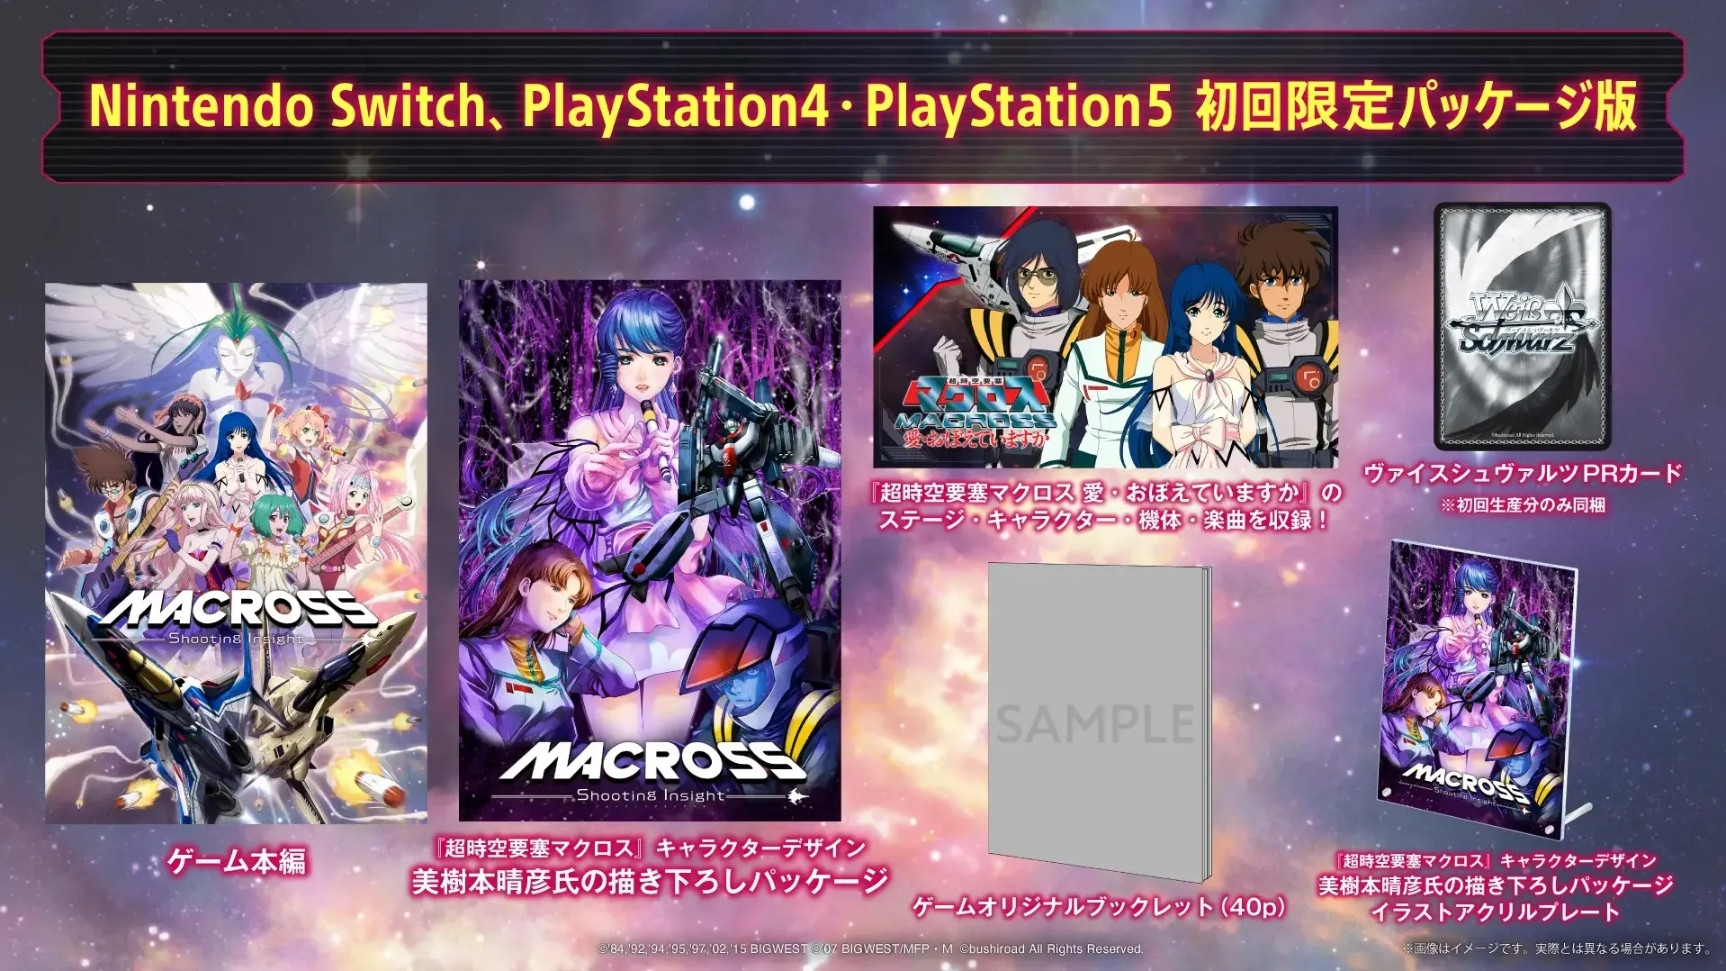 Macross: Shooting Insight Limited Edition - Nintendo Switch